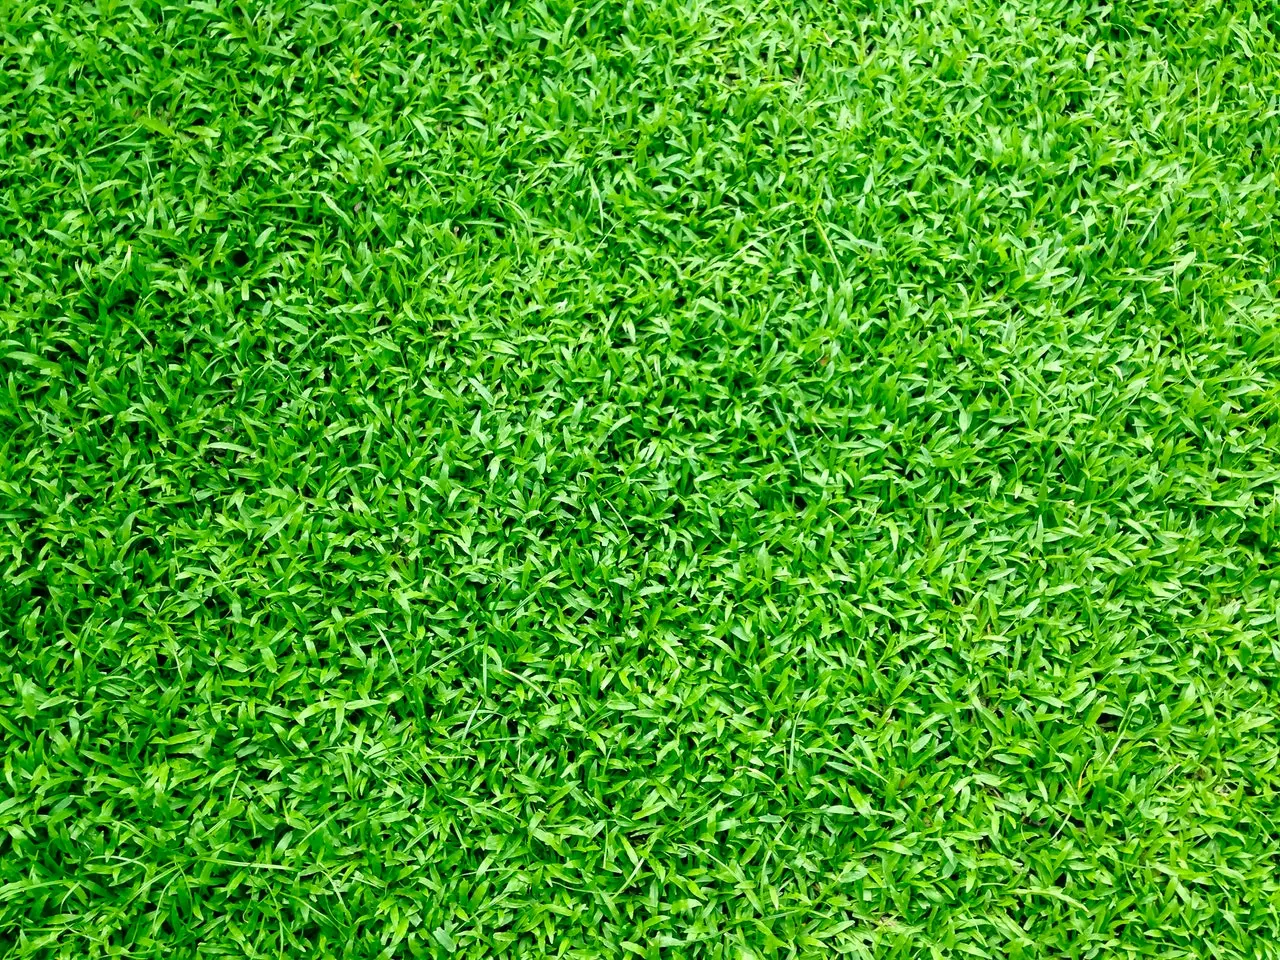 How Lawn Fertilization Helps Your Lawn Resist Extreme Weather